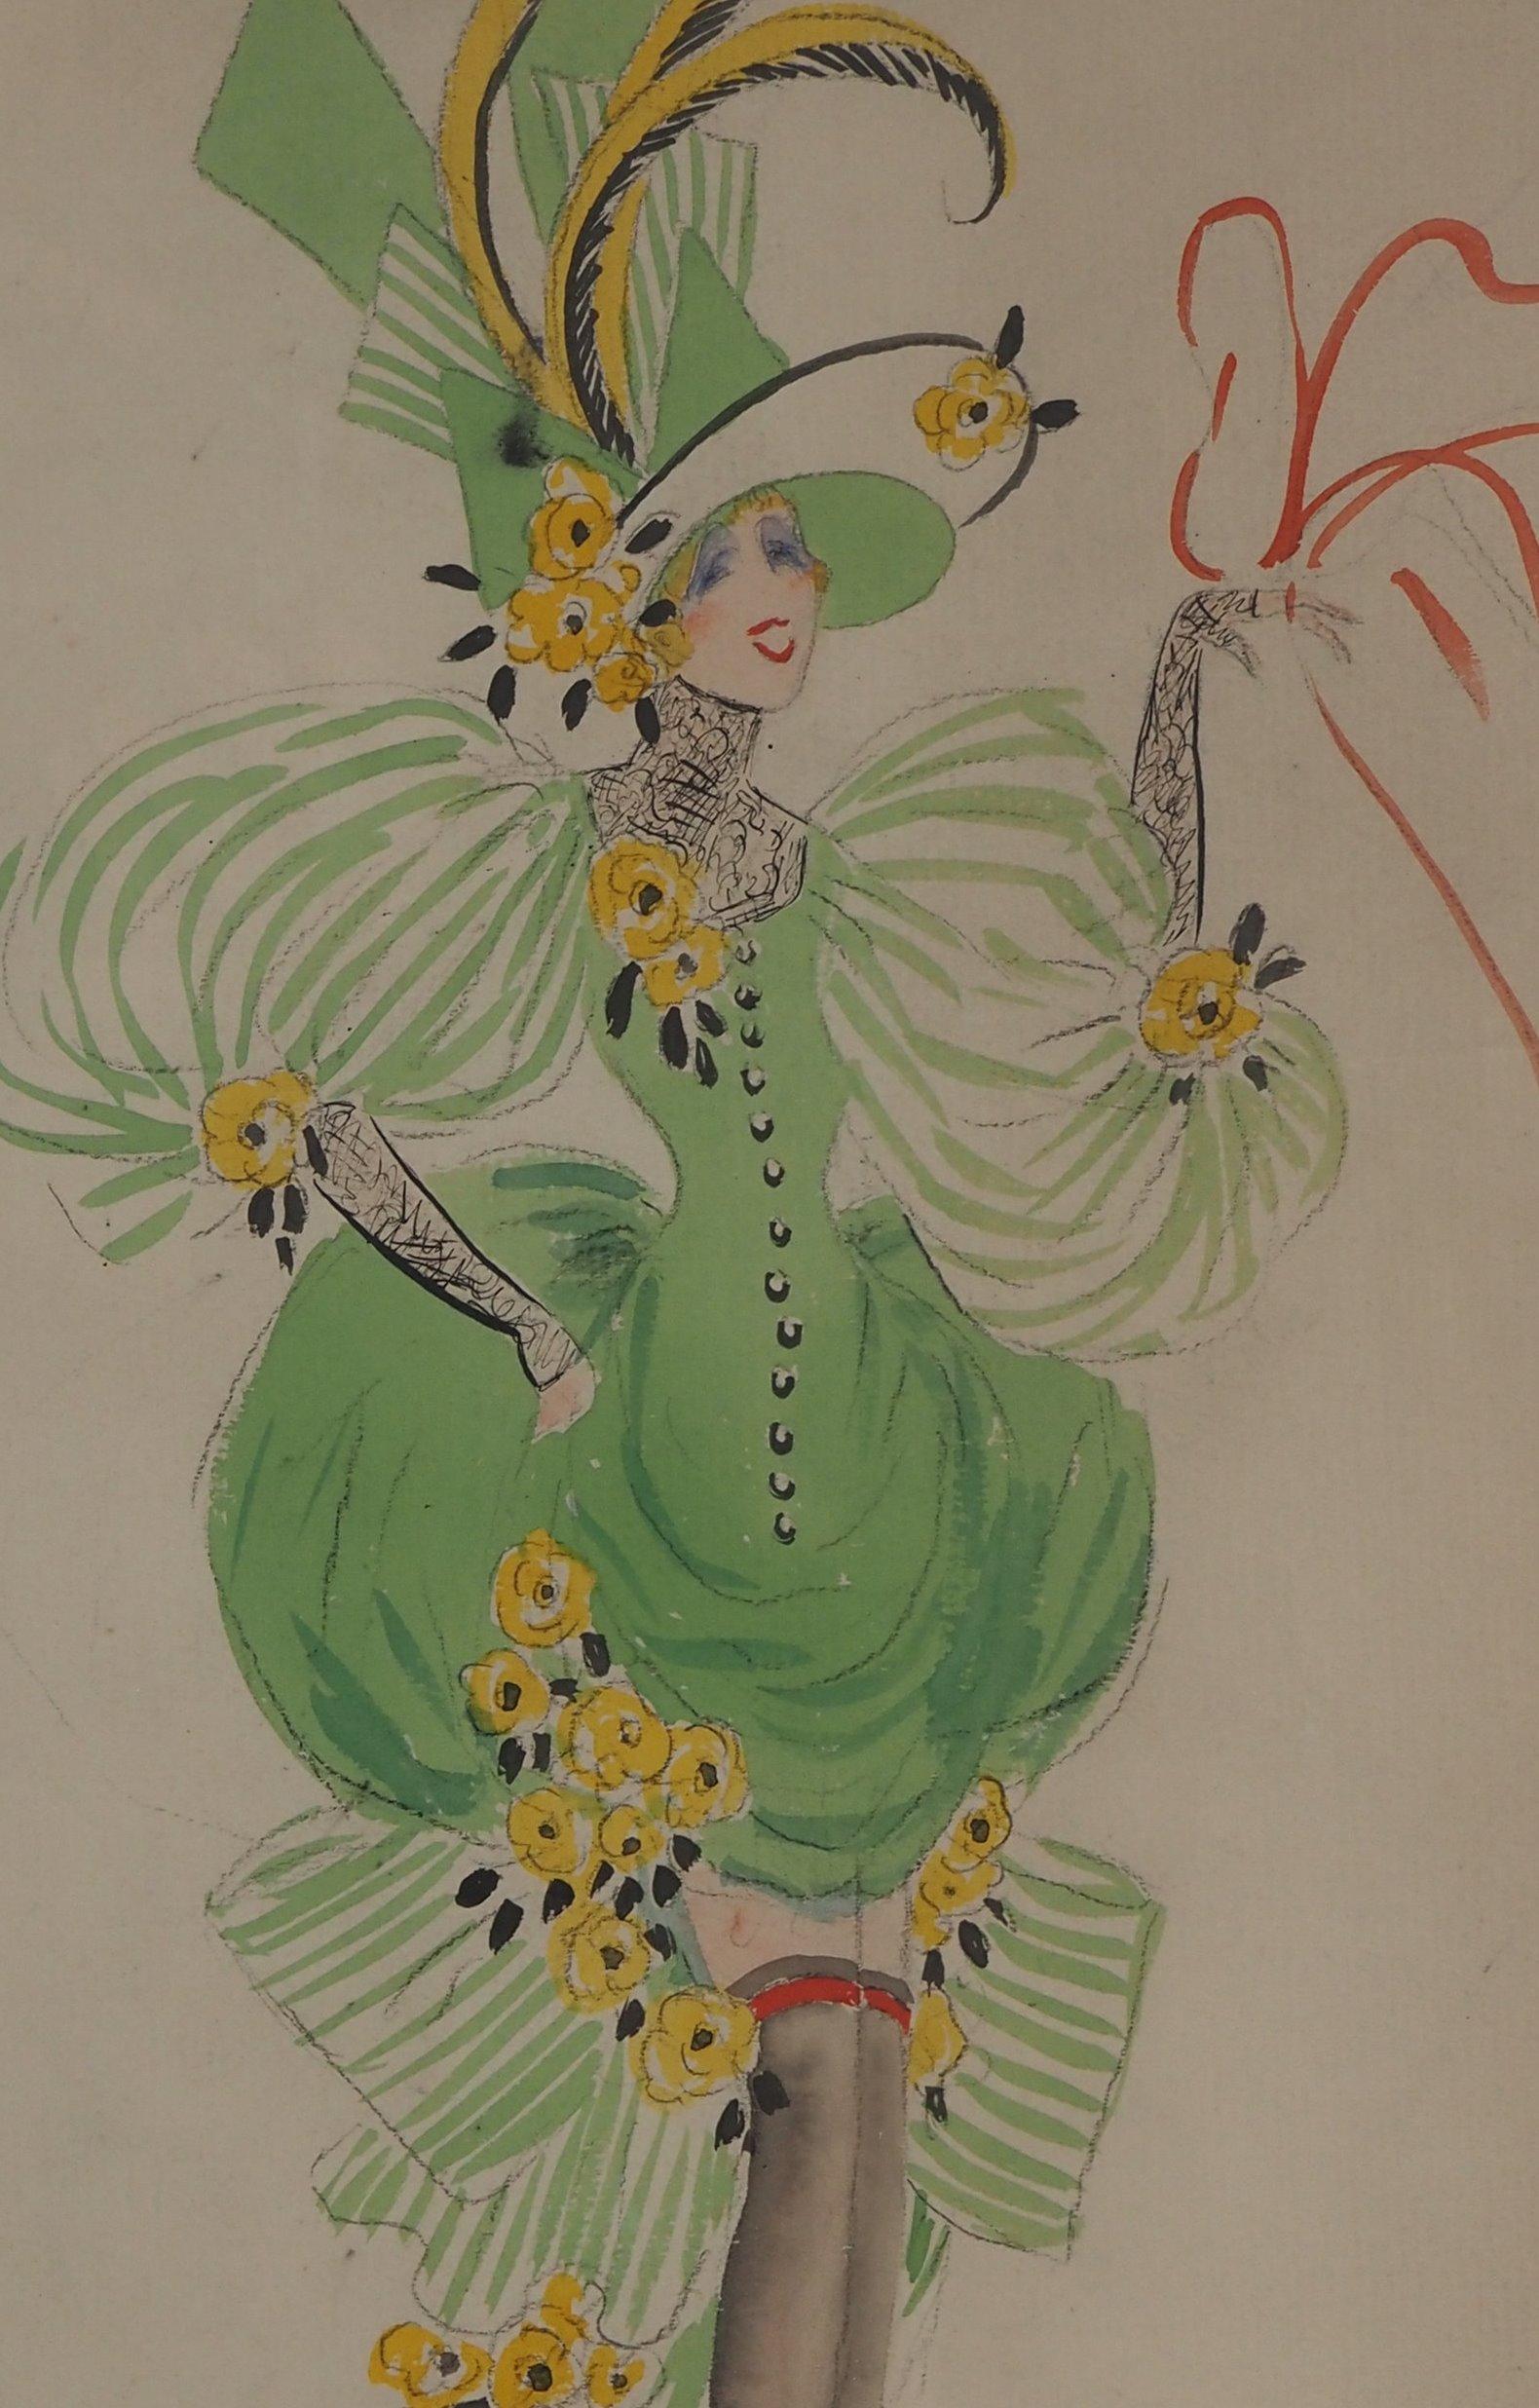 Jean Gabriel DOMERGUE (1889-1962)
Theater Costume : Allegory of Spring and Little Dog 

Original ink and watercolor drawing
Handsigned bottom right
On paper 32×25 cm at view (c. 13 x 10in)
Presented in golden wood frame 43 x 28 cm (c. 21 x 11

Very